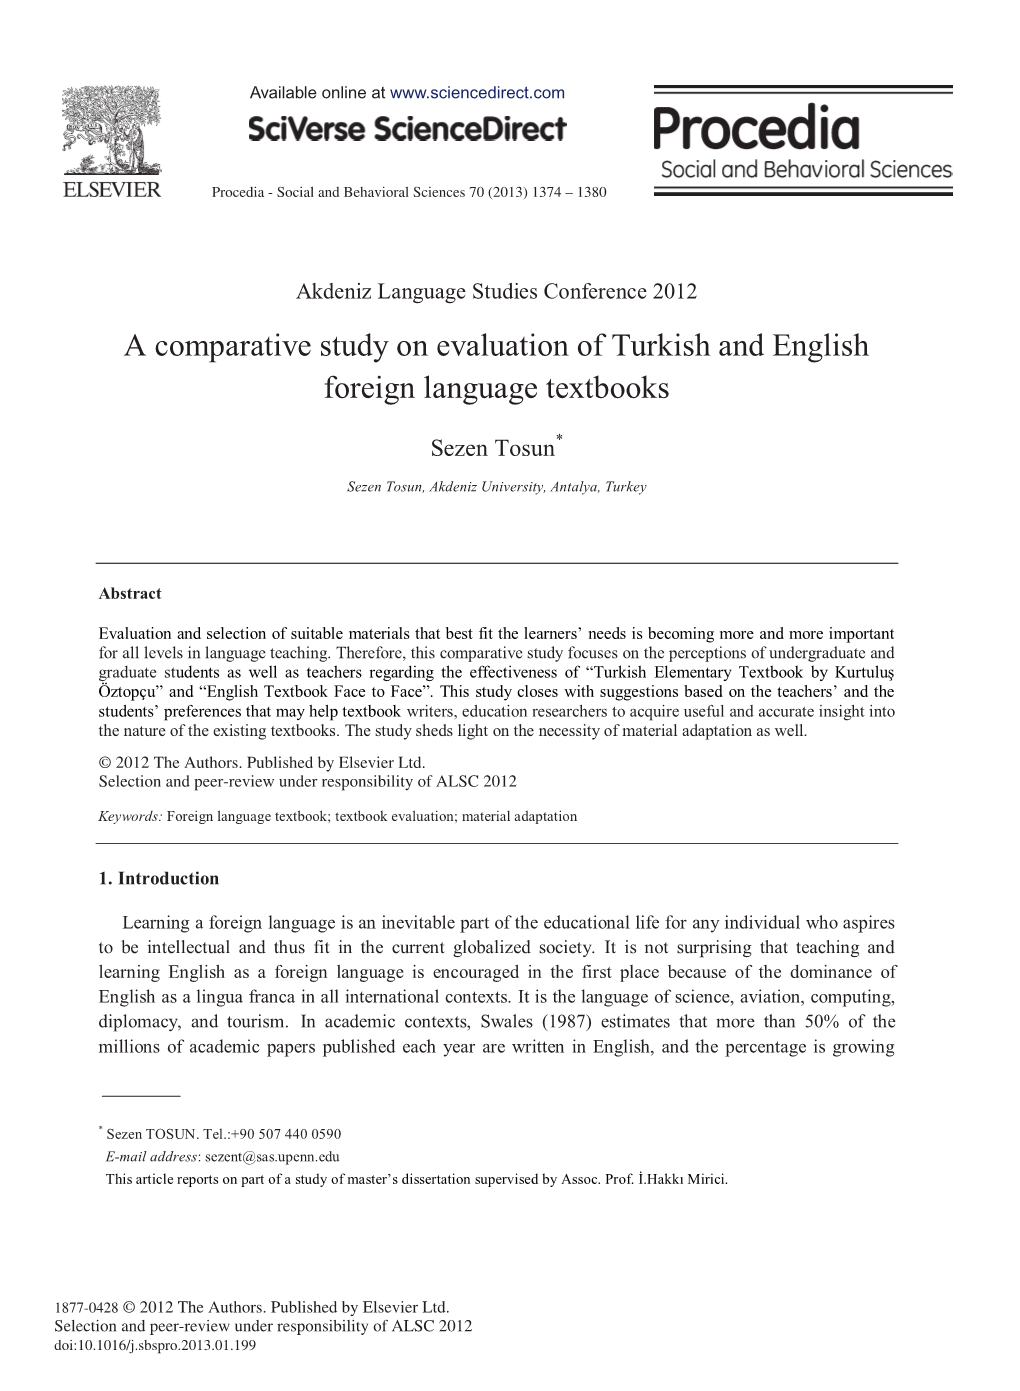 A Comparative Study on Evaluation of Turkish and English Foreign Language Textbooks